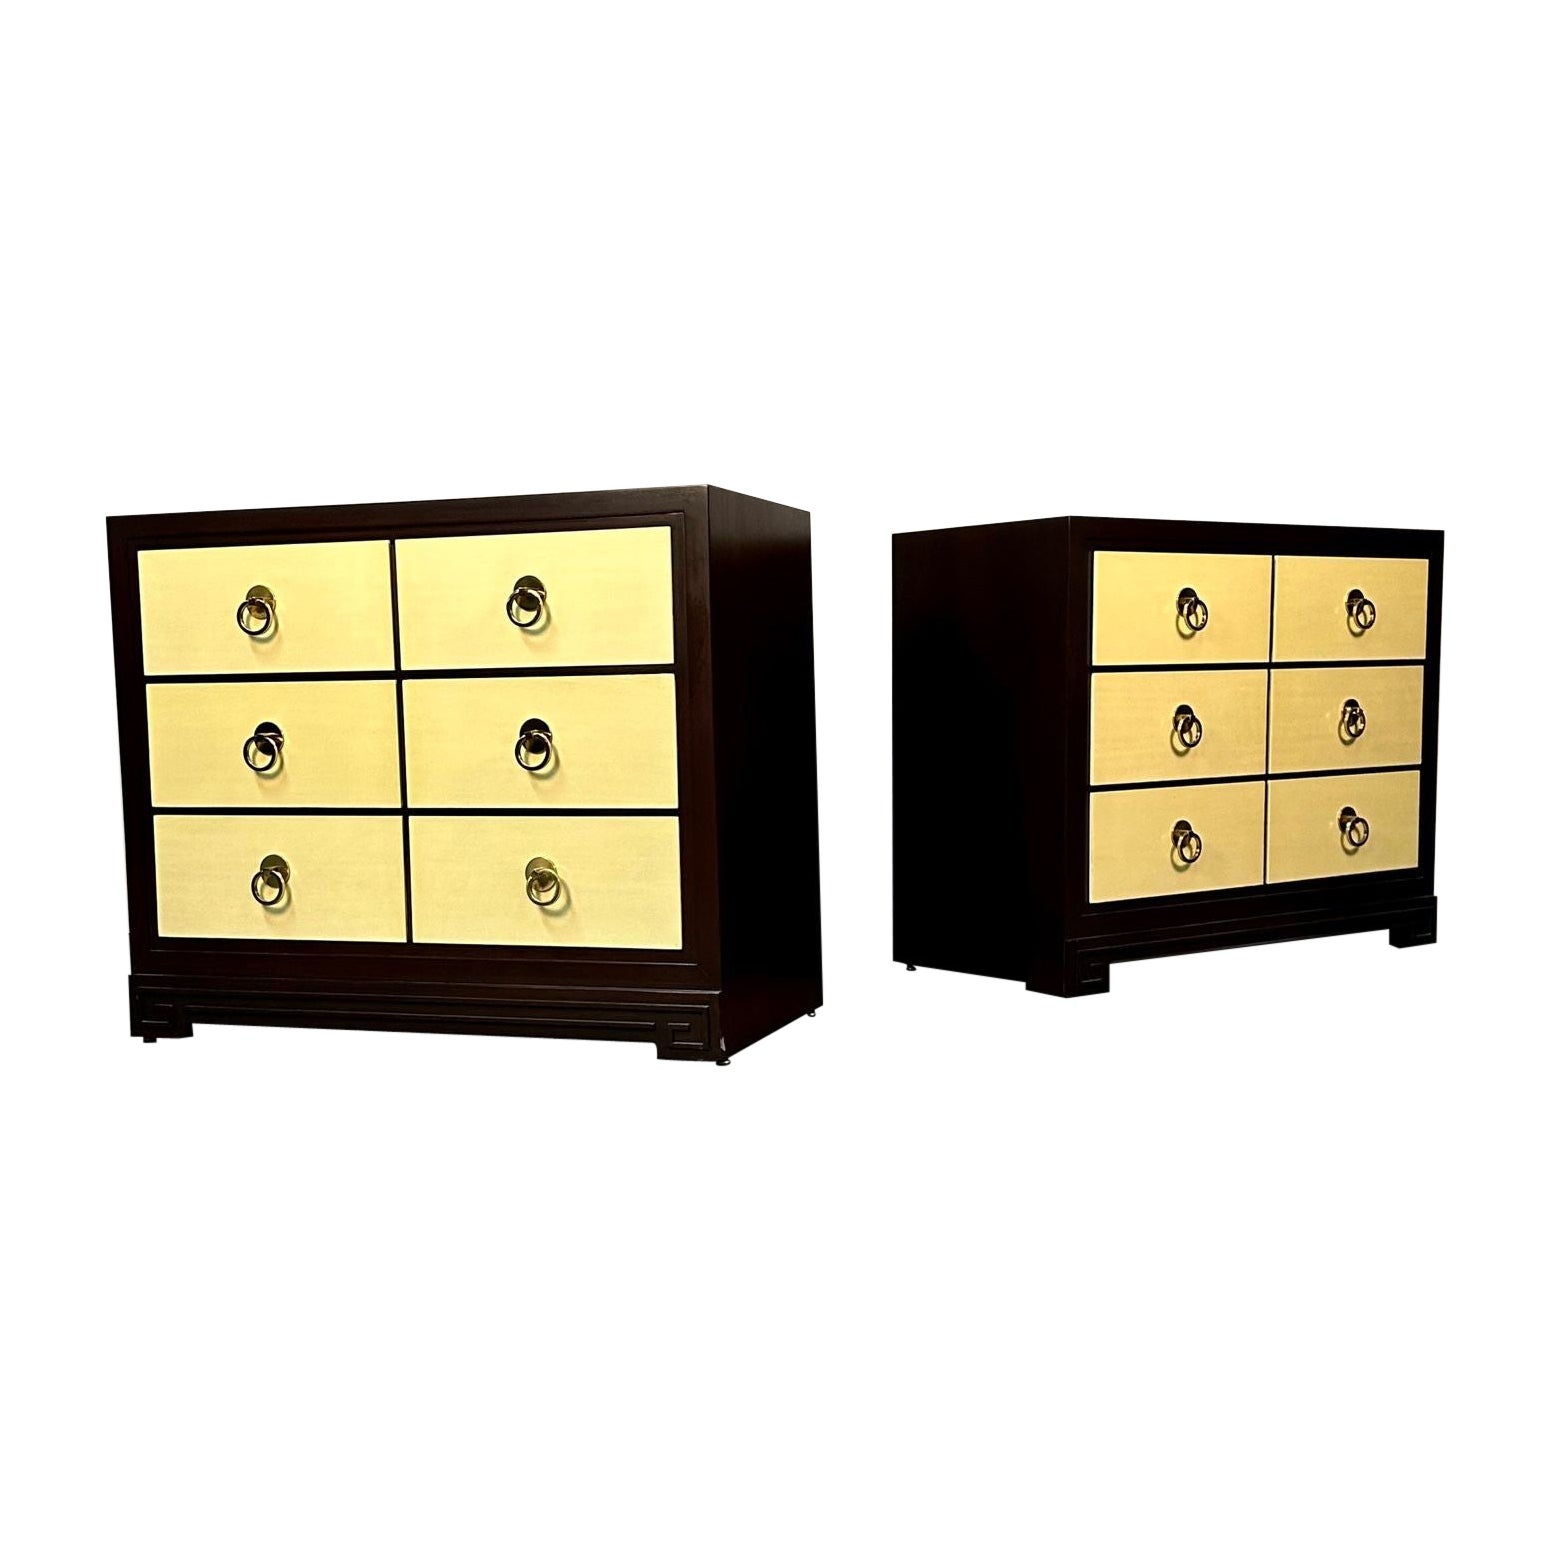 Pair of Mid-Century Modern John Stuart Parchment Nightstands / Dressers / Chests For Sale